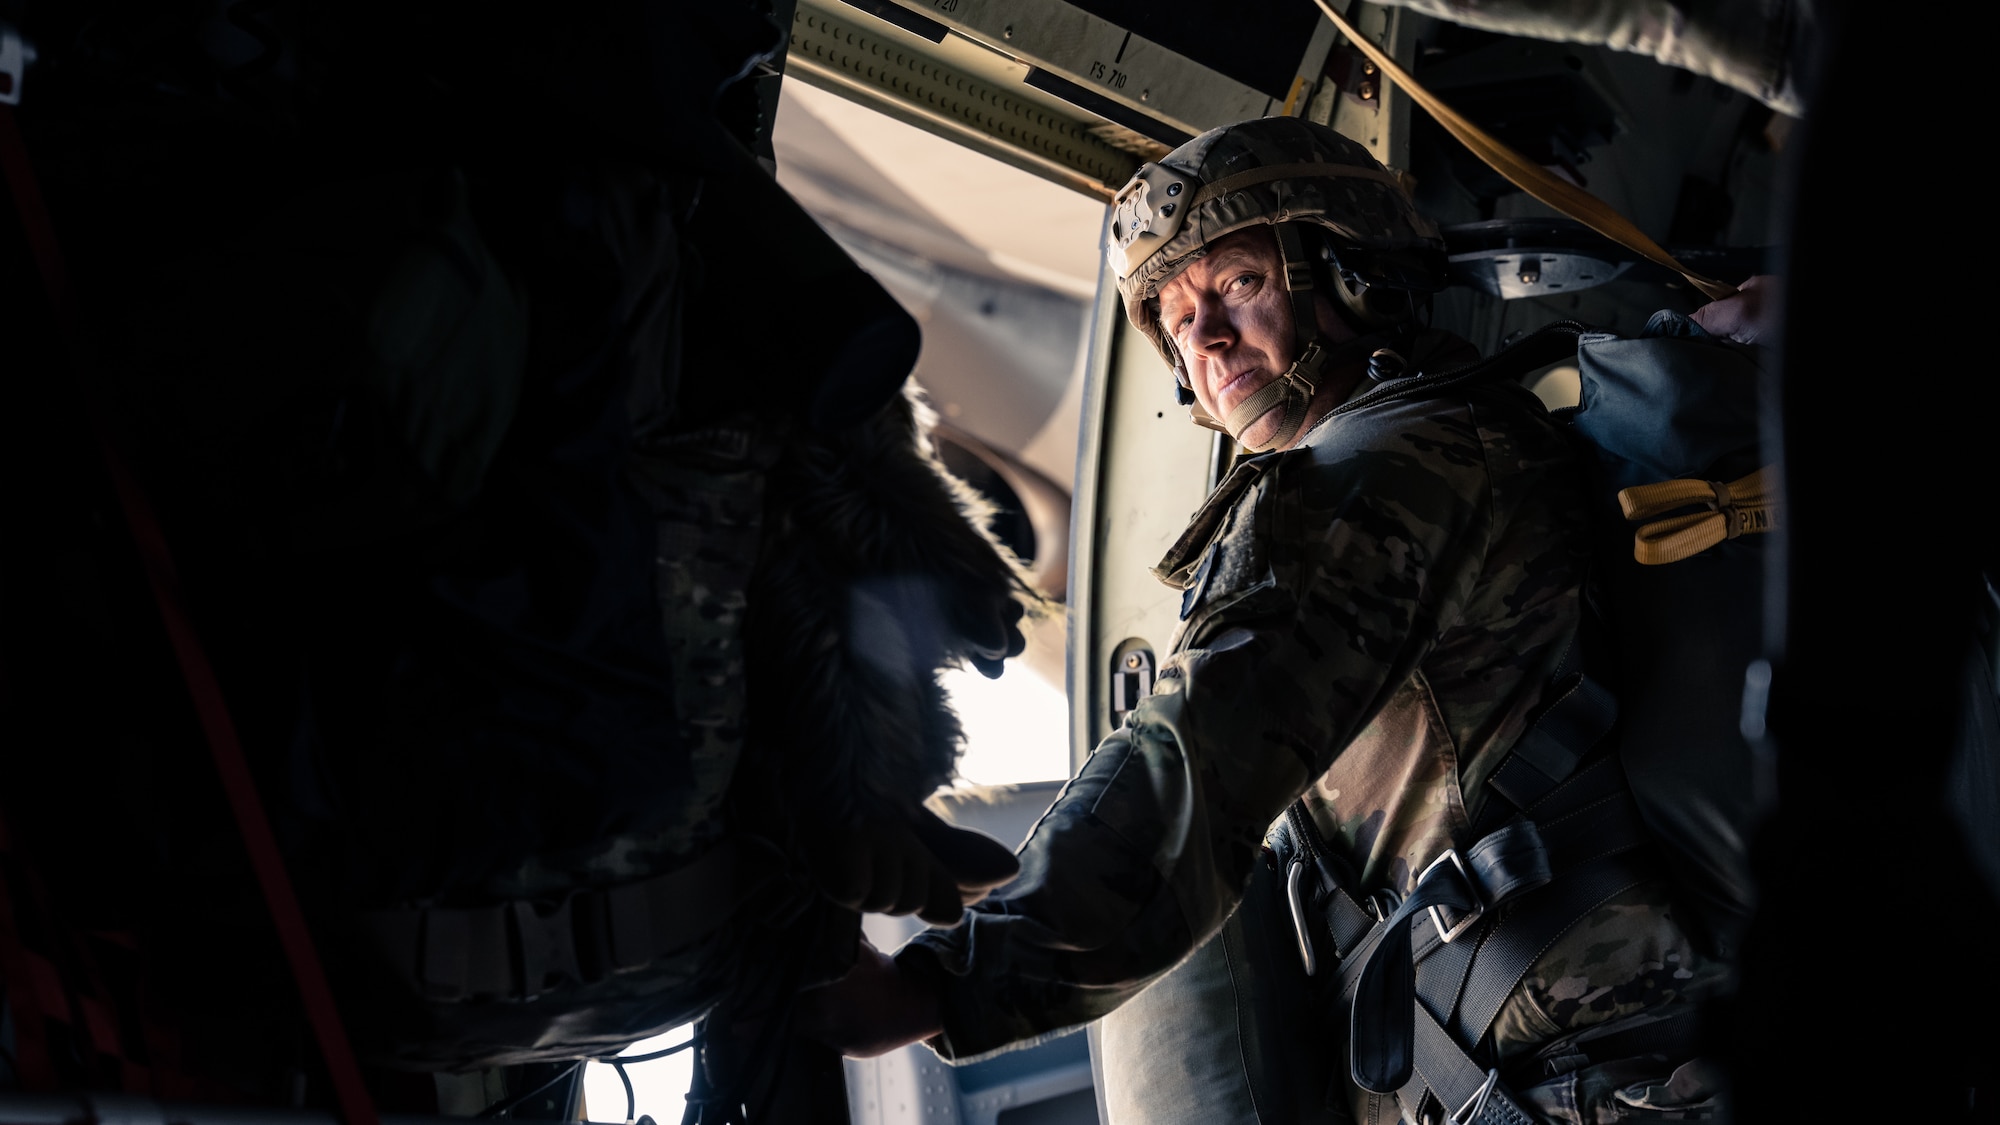 A Texas Army National Guard Soldier assigned to the 1st Battalion, 143rd Infantry Airborne Regiment prepares to jump from a C-130J Super Hercules from the 386th Air Expeditionary Wing during an airborne operation over Egypt in support of exercise Bright Star 23, Sept. 7, 2023. Bright Star 23 is a multilateral U.S. Central Command exercise held with the Arab Republic of Egypt across air, land, and sea domains that promotes and enhances regional security and cooperation, and improves interoperability in irregular warfare against hybrid threat scenarios. (U.S. Air Force photo by Staff Sgt. Kevin Long)